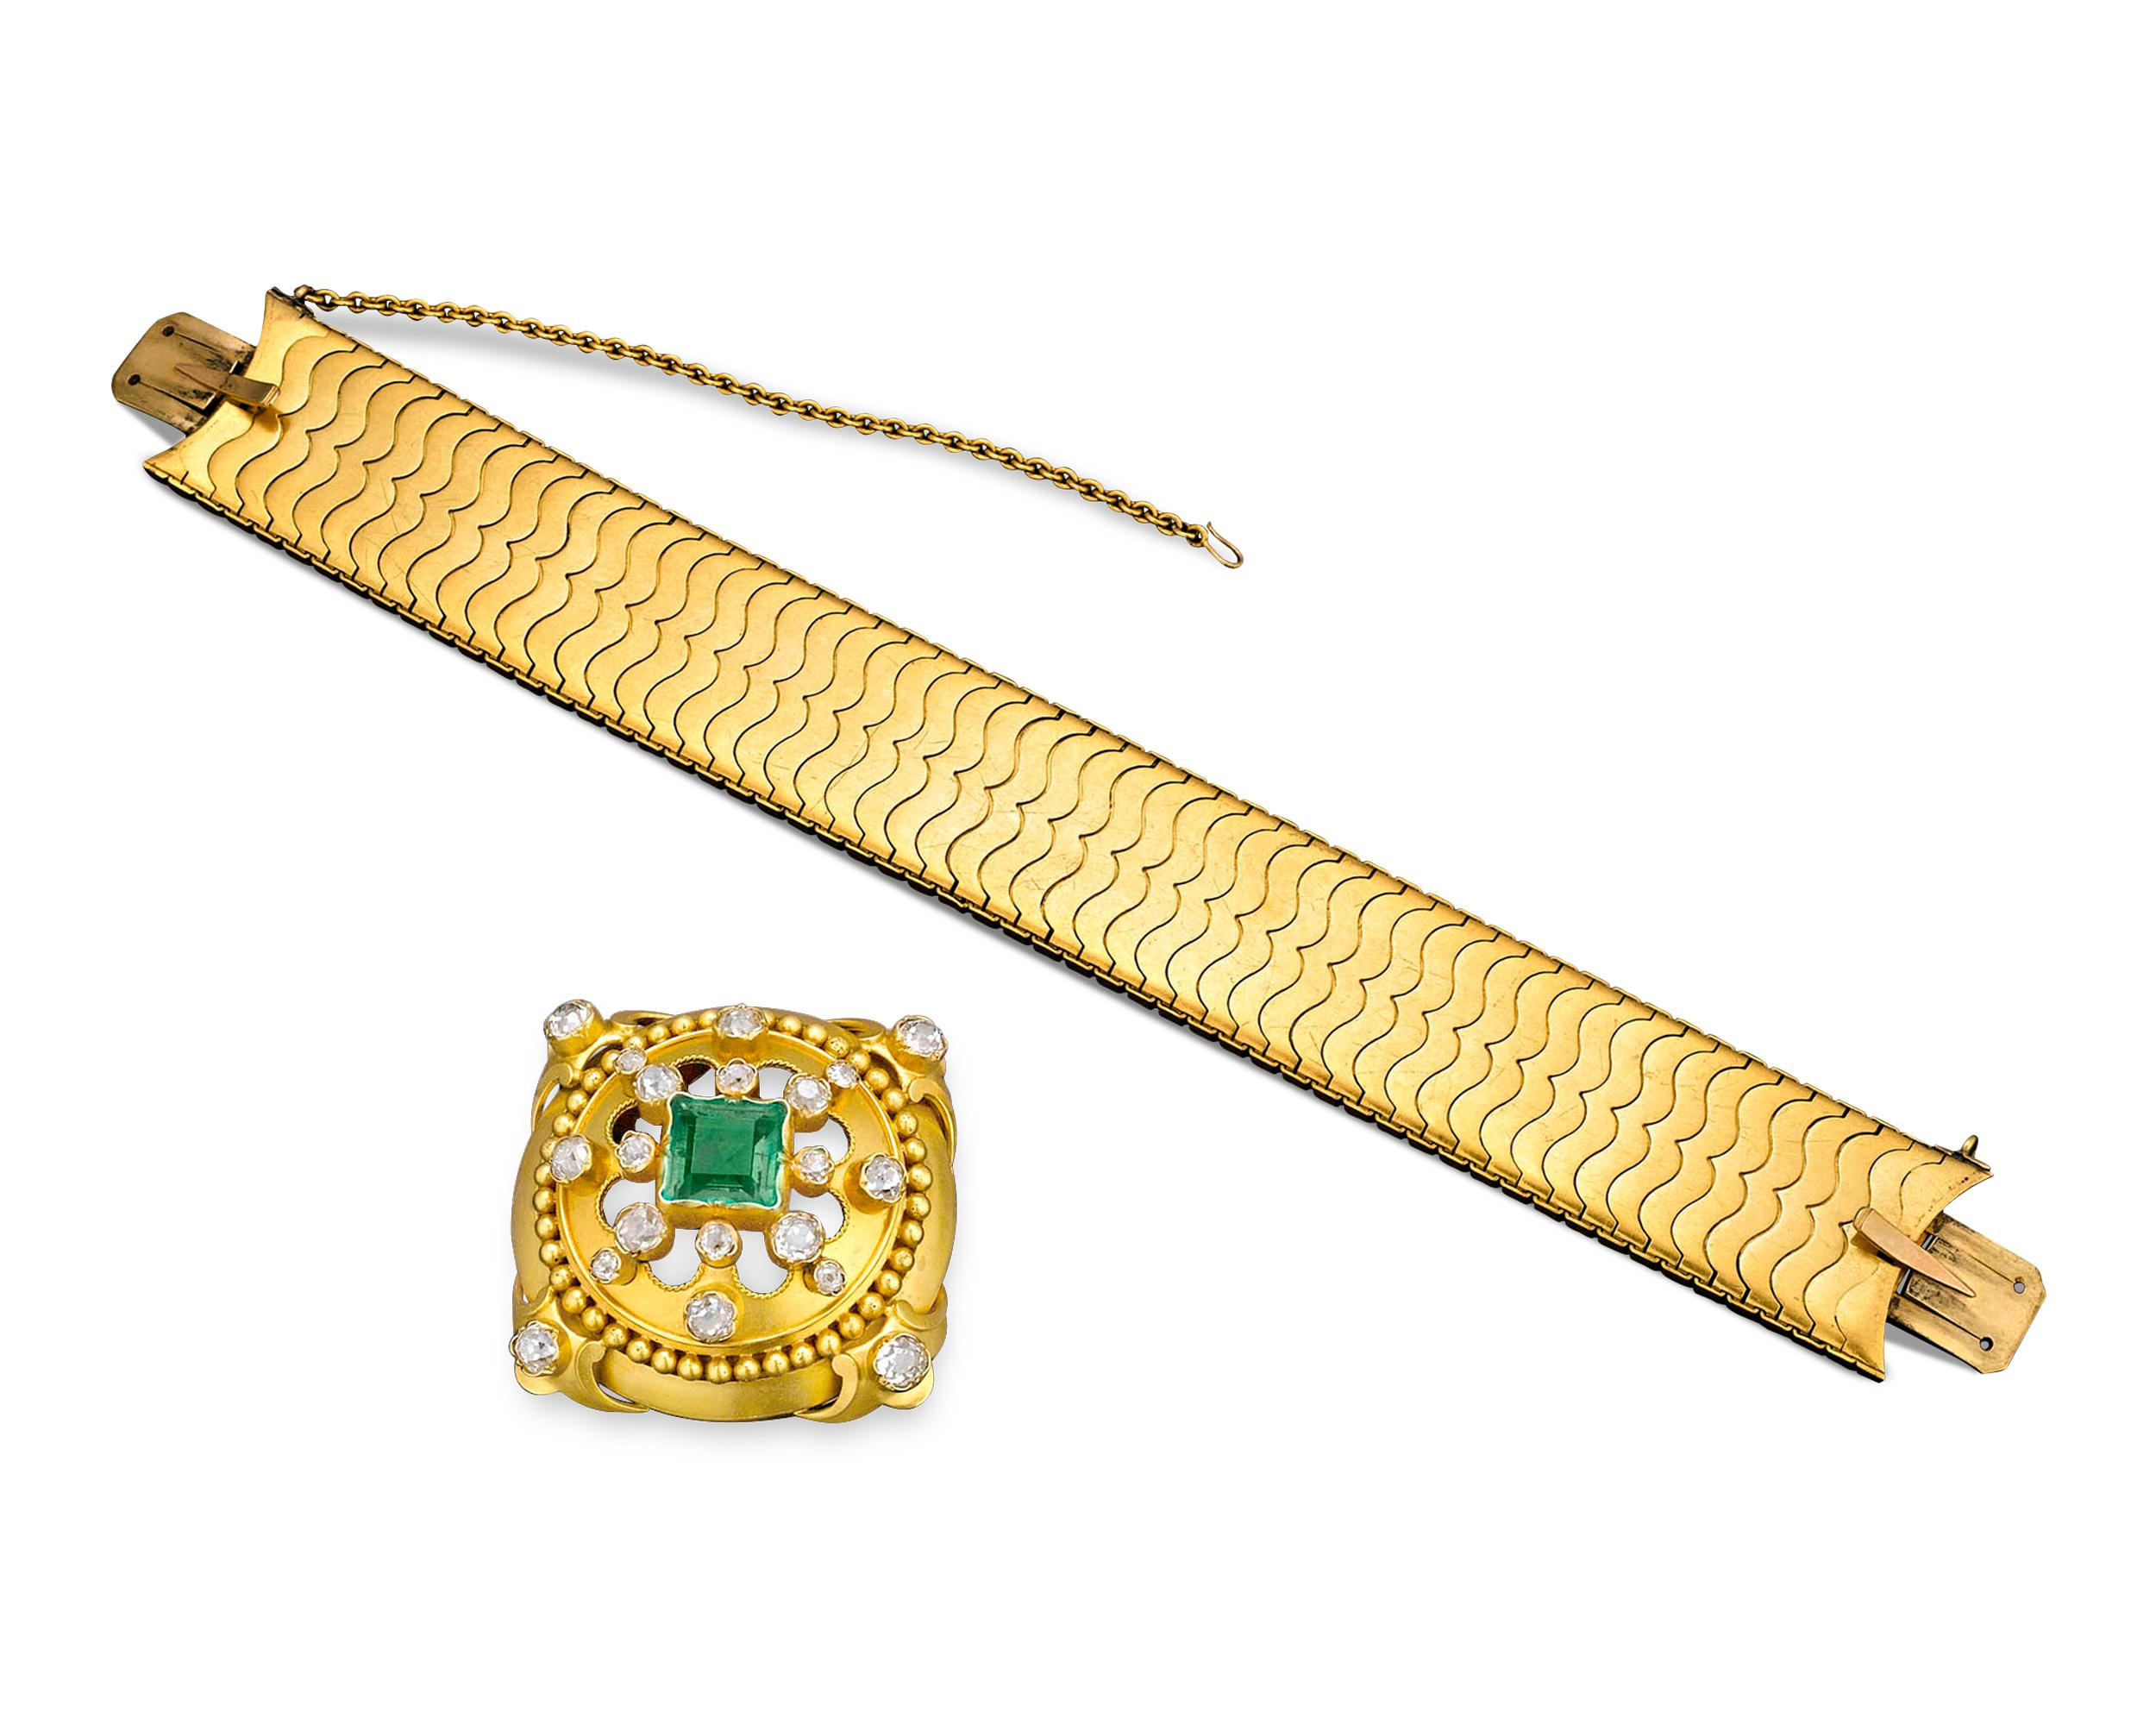 A truly splendid example of Victorian jewelry, this outstanding bracelet by Hunt & Roskell is a tour-de-force of 19th-century design. Bold and dynamic, this bracelet is comprised of a pierced central medallion that glows thanks to a square step-cut